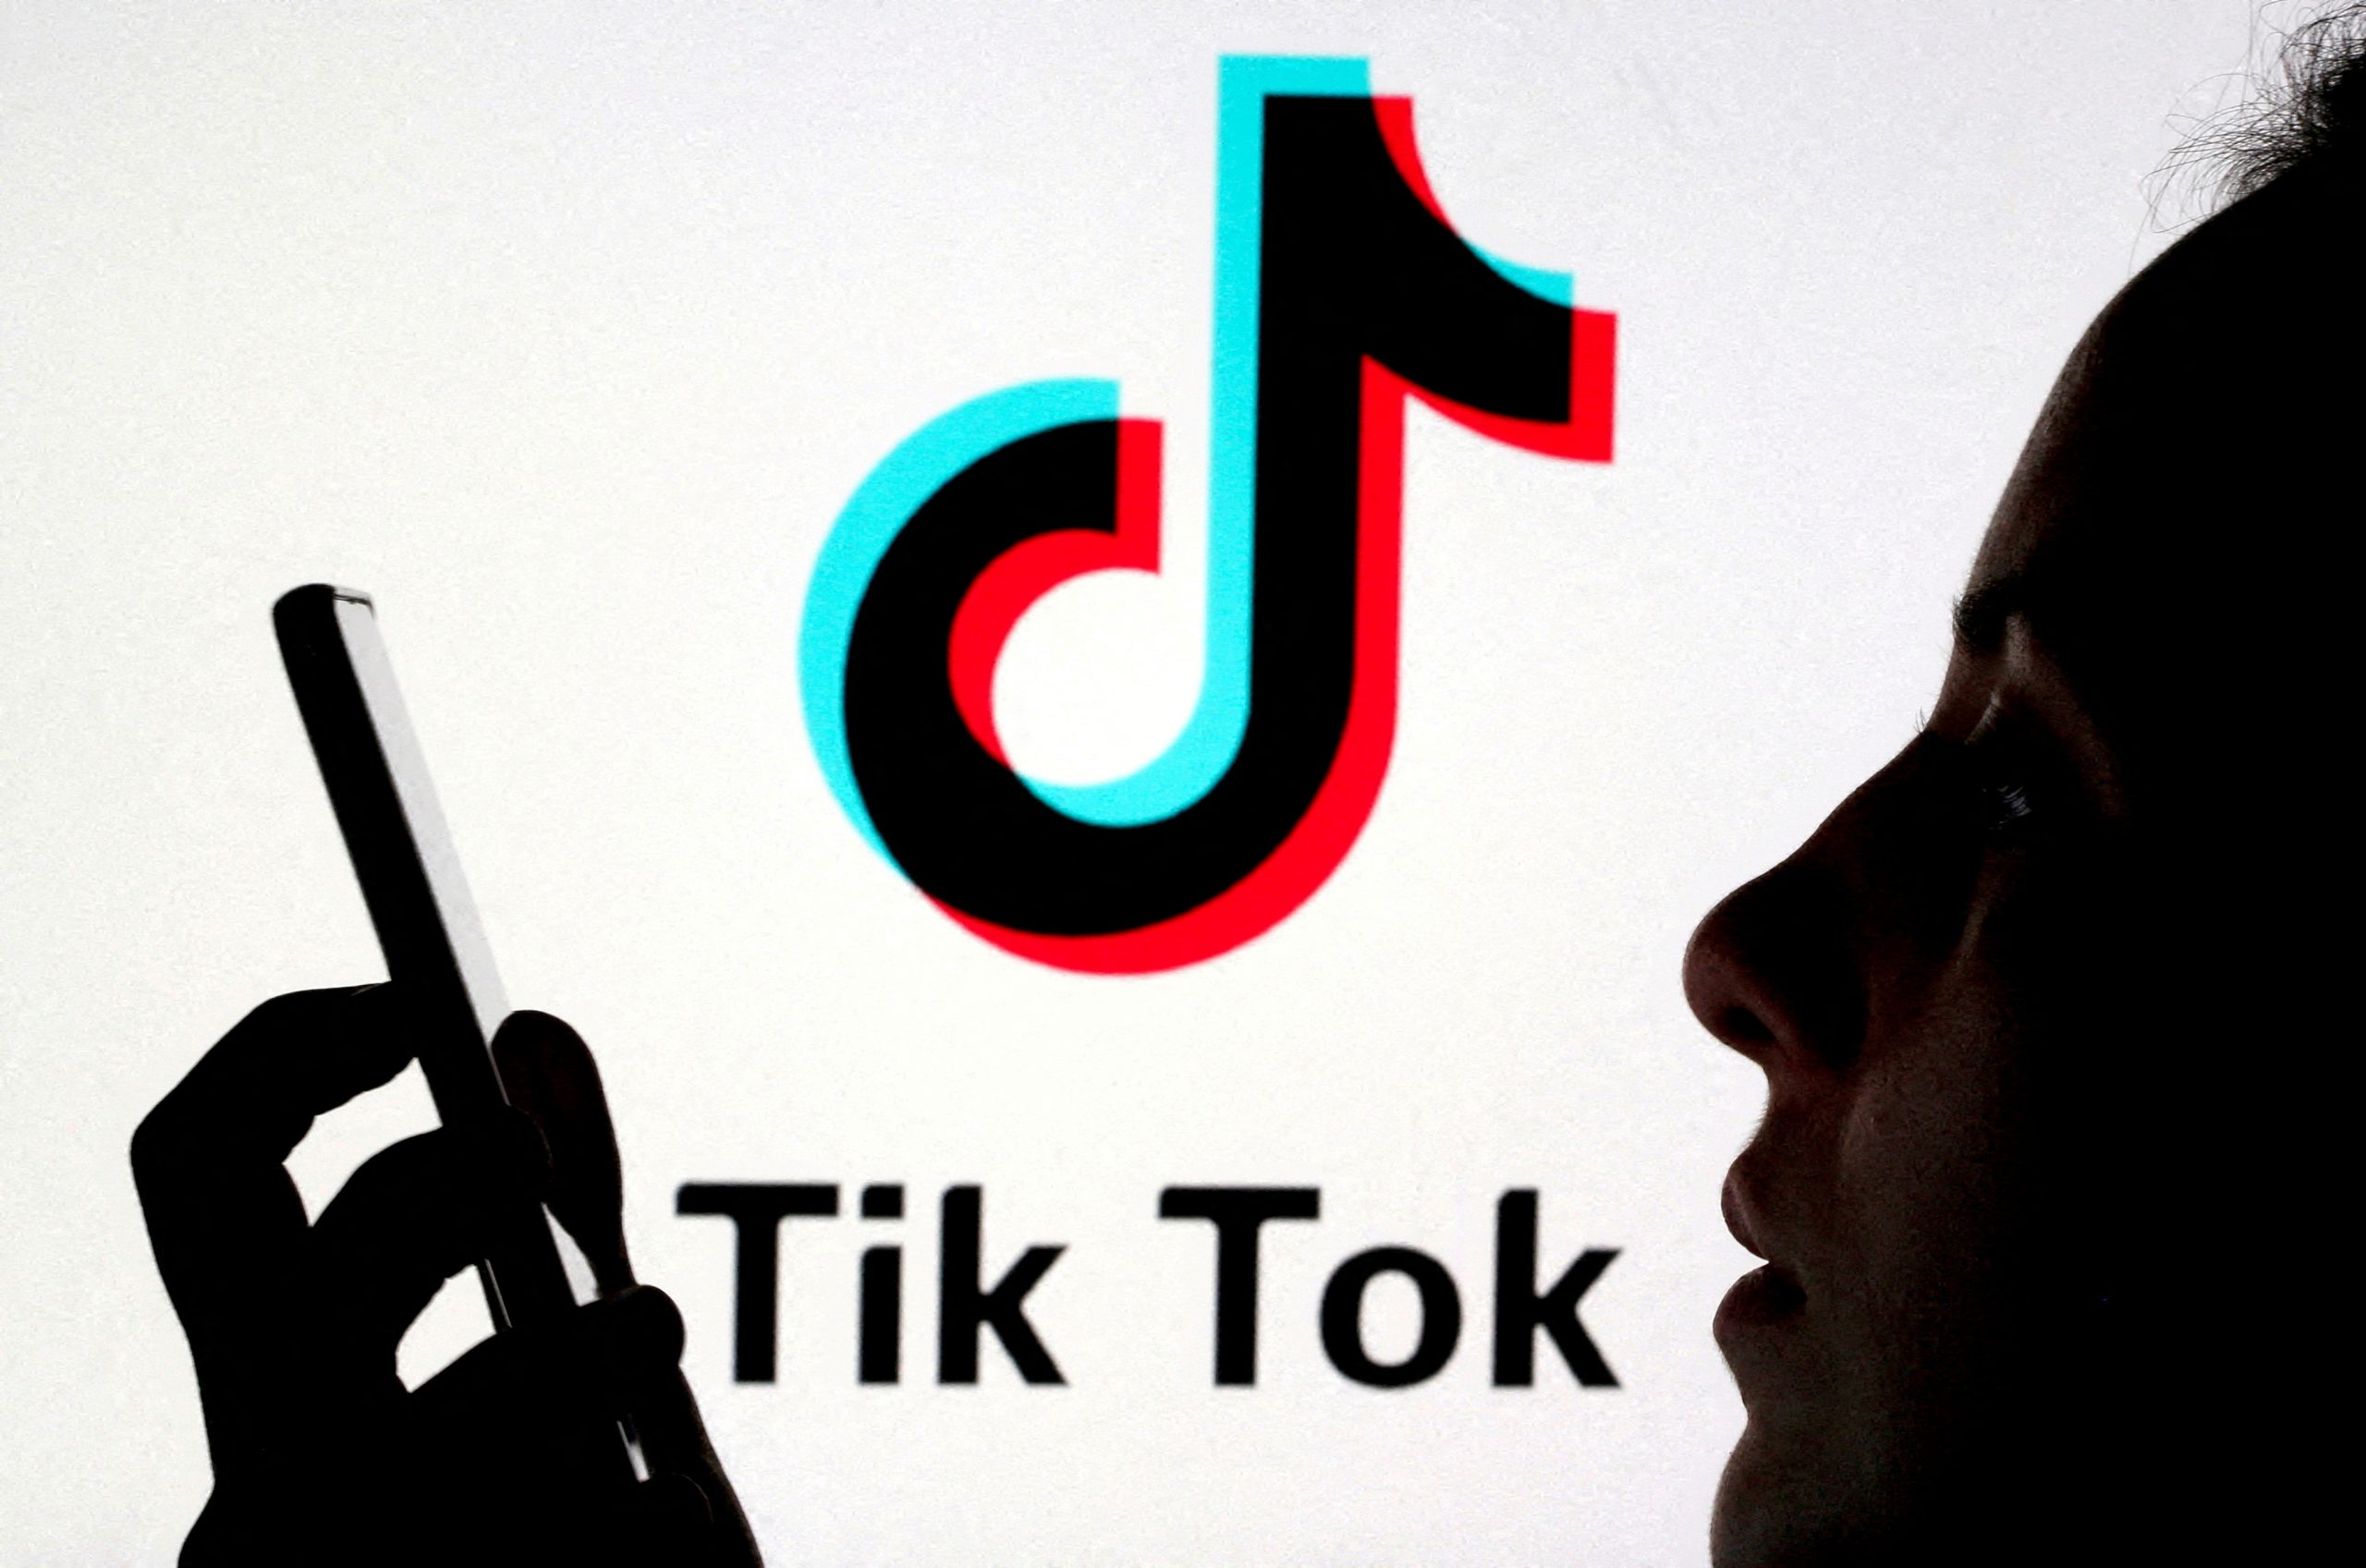 Recently Montana Governor Greg Gianforte passed the bill to ban TikTok in the state. This event has drawn the attention of domestic and international 